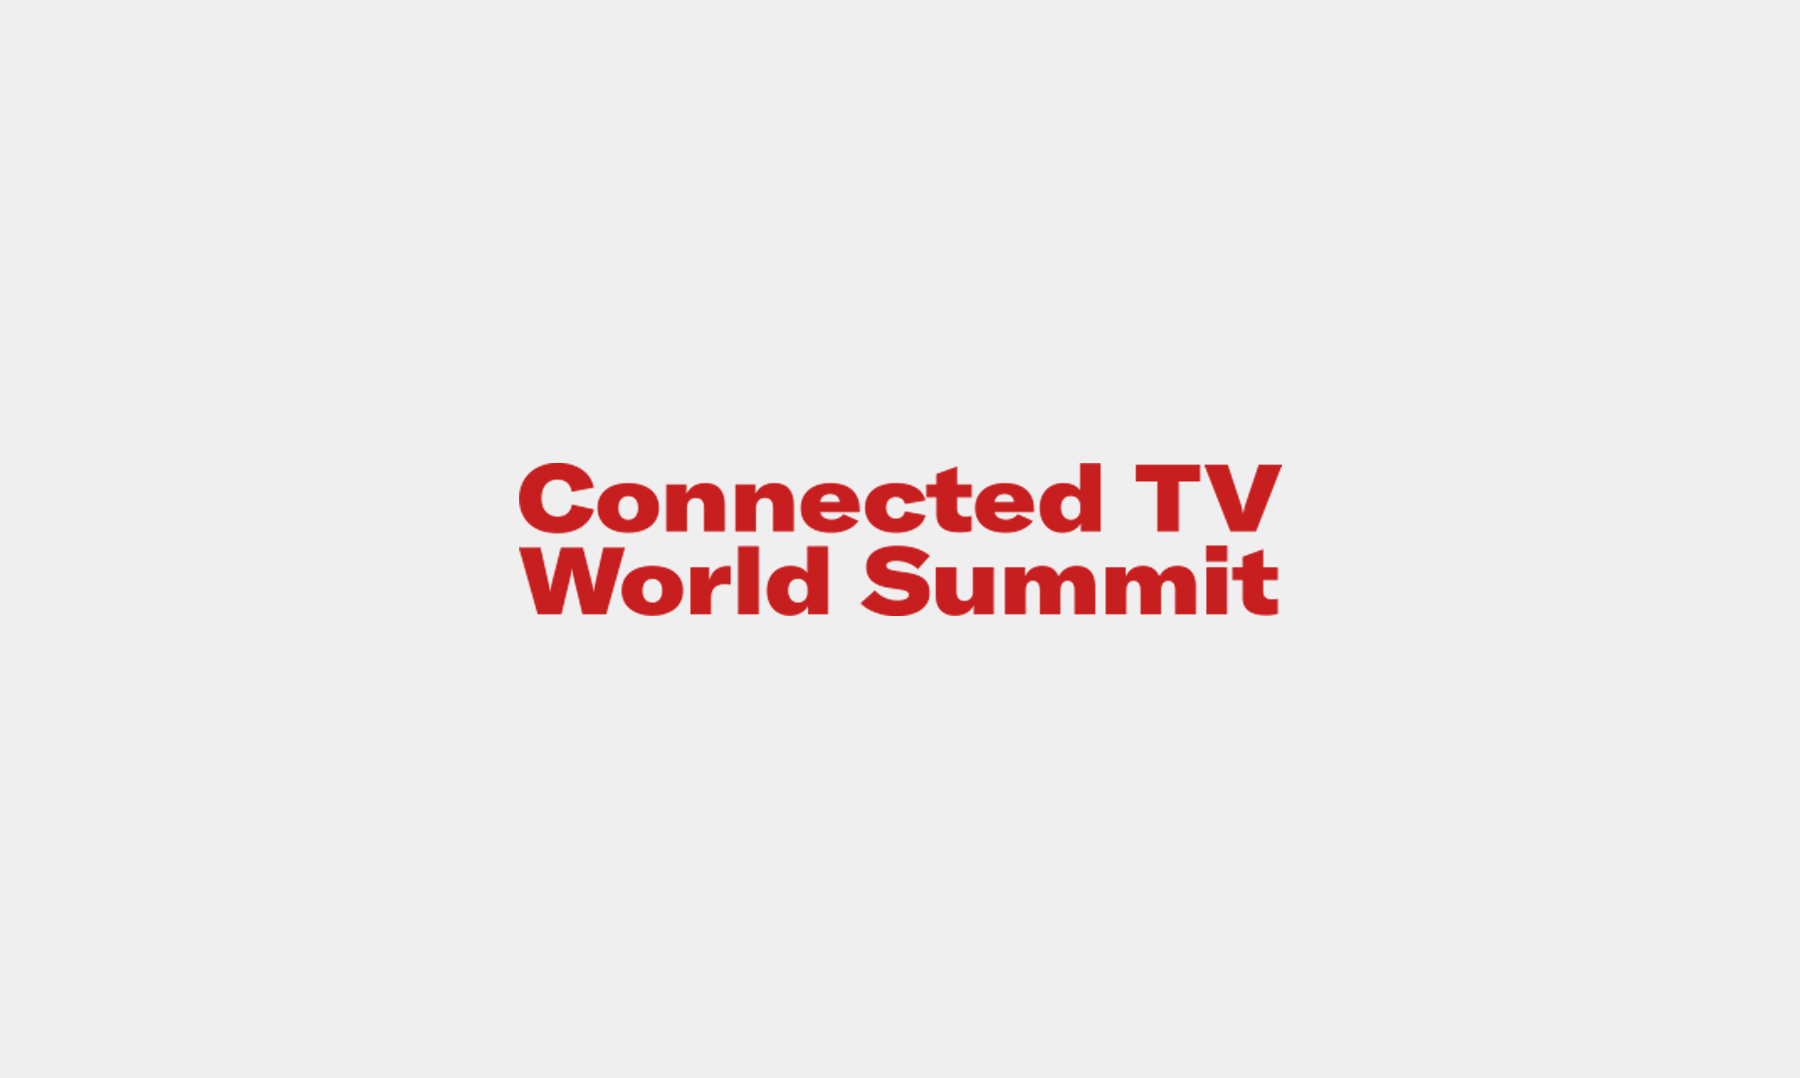 Connected TV World Summit Synamedia